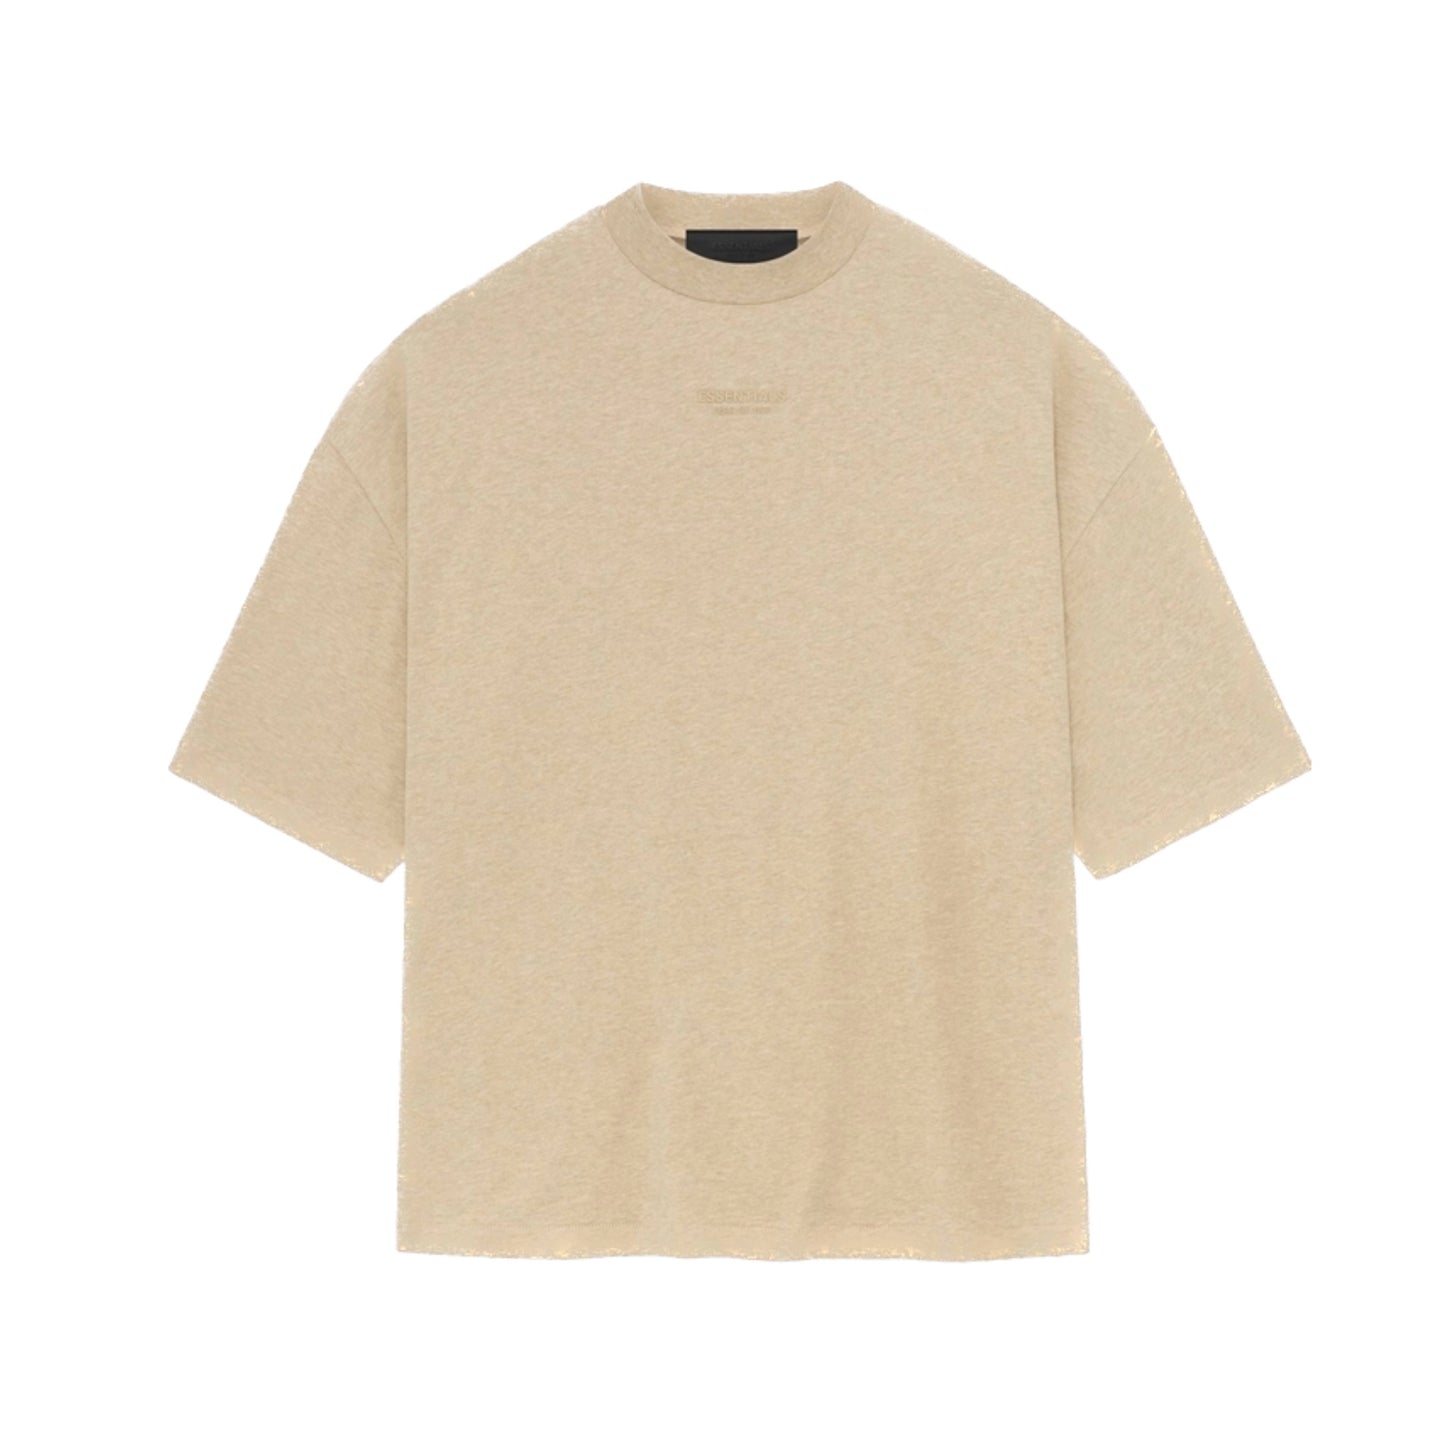 Fear of God Essentials Gold Heather Tee